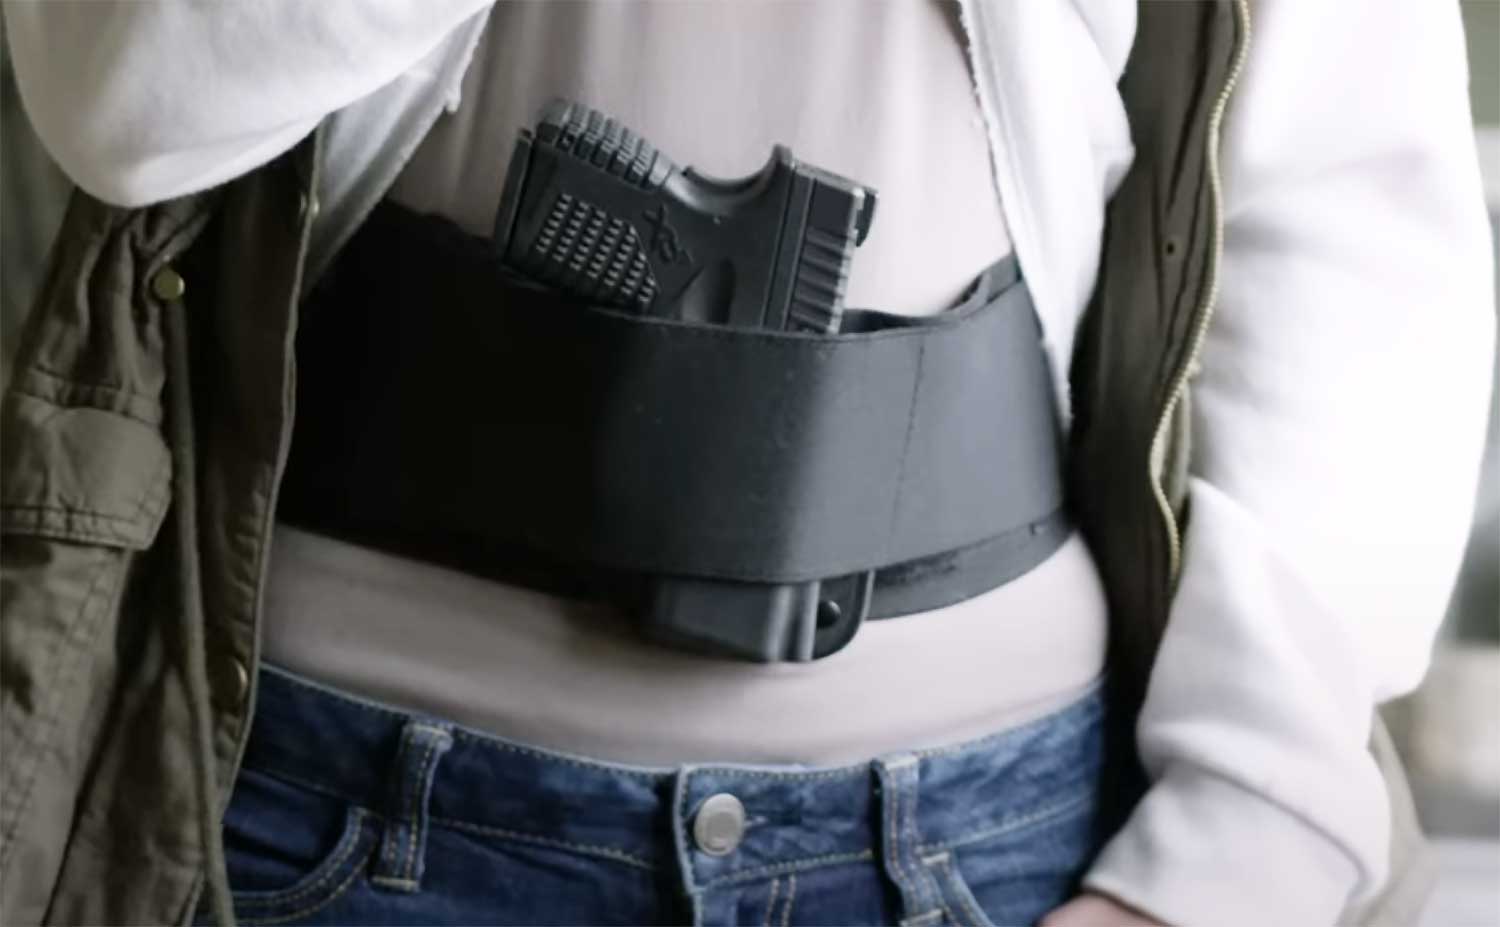 Pin on Concealed carry